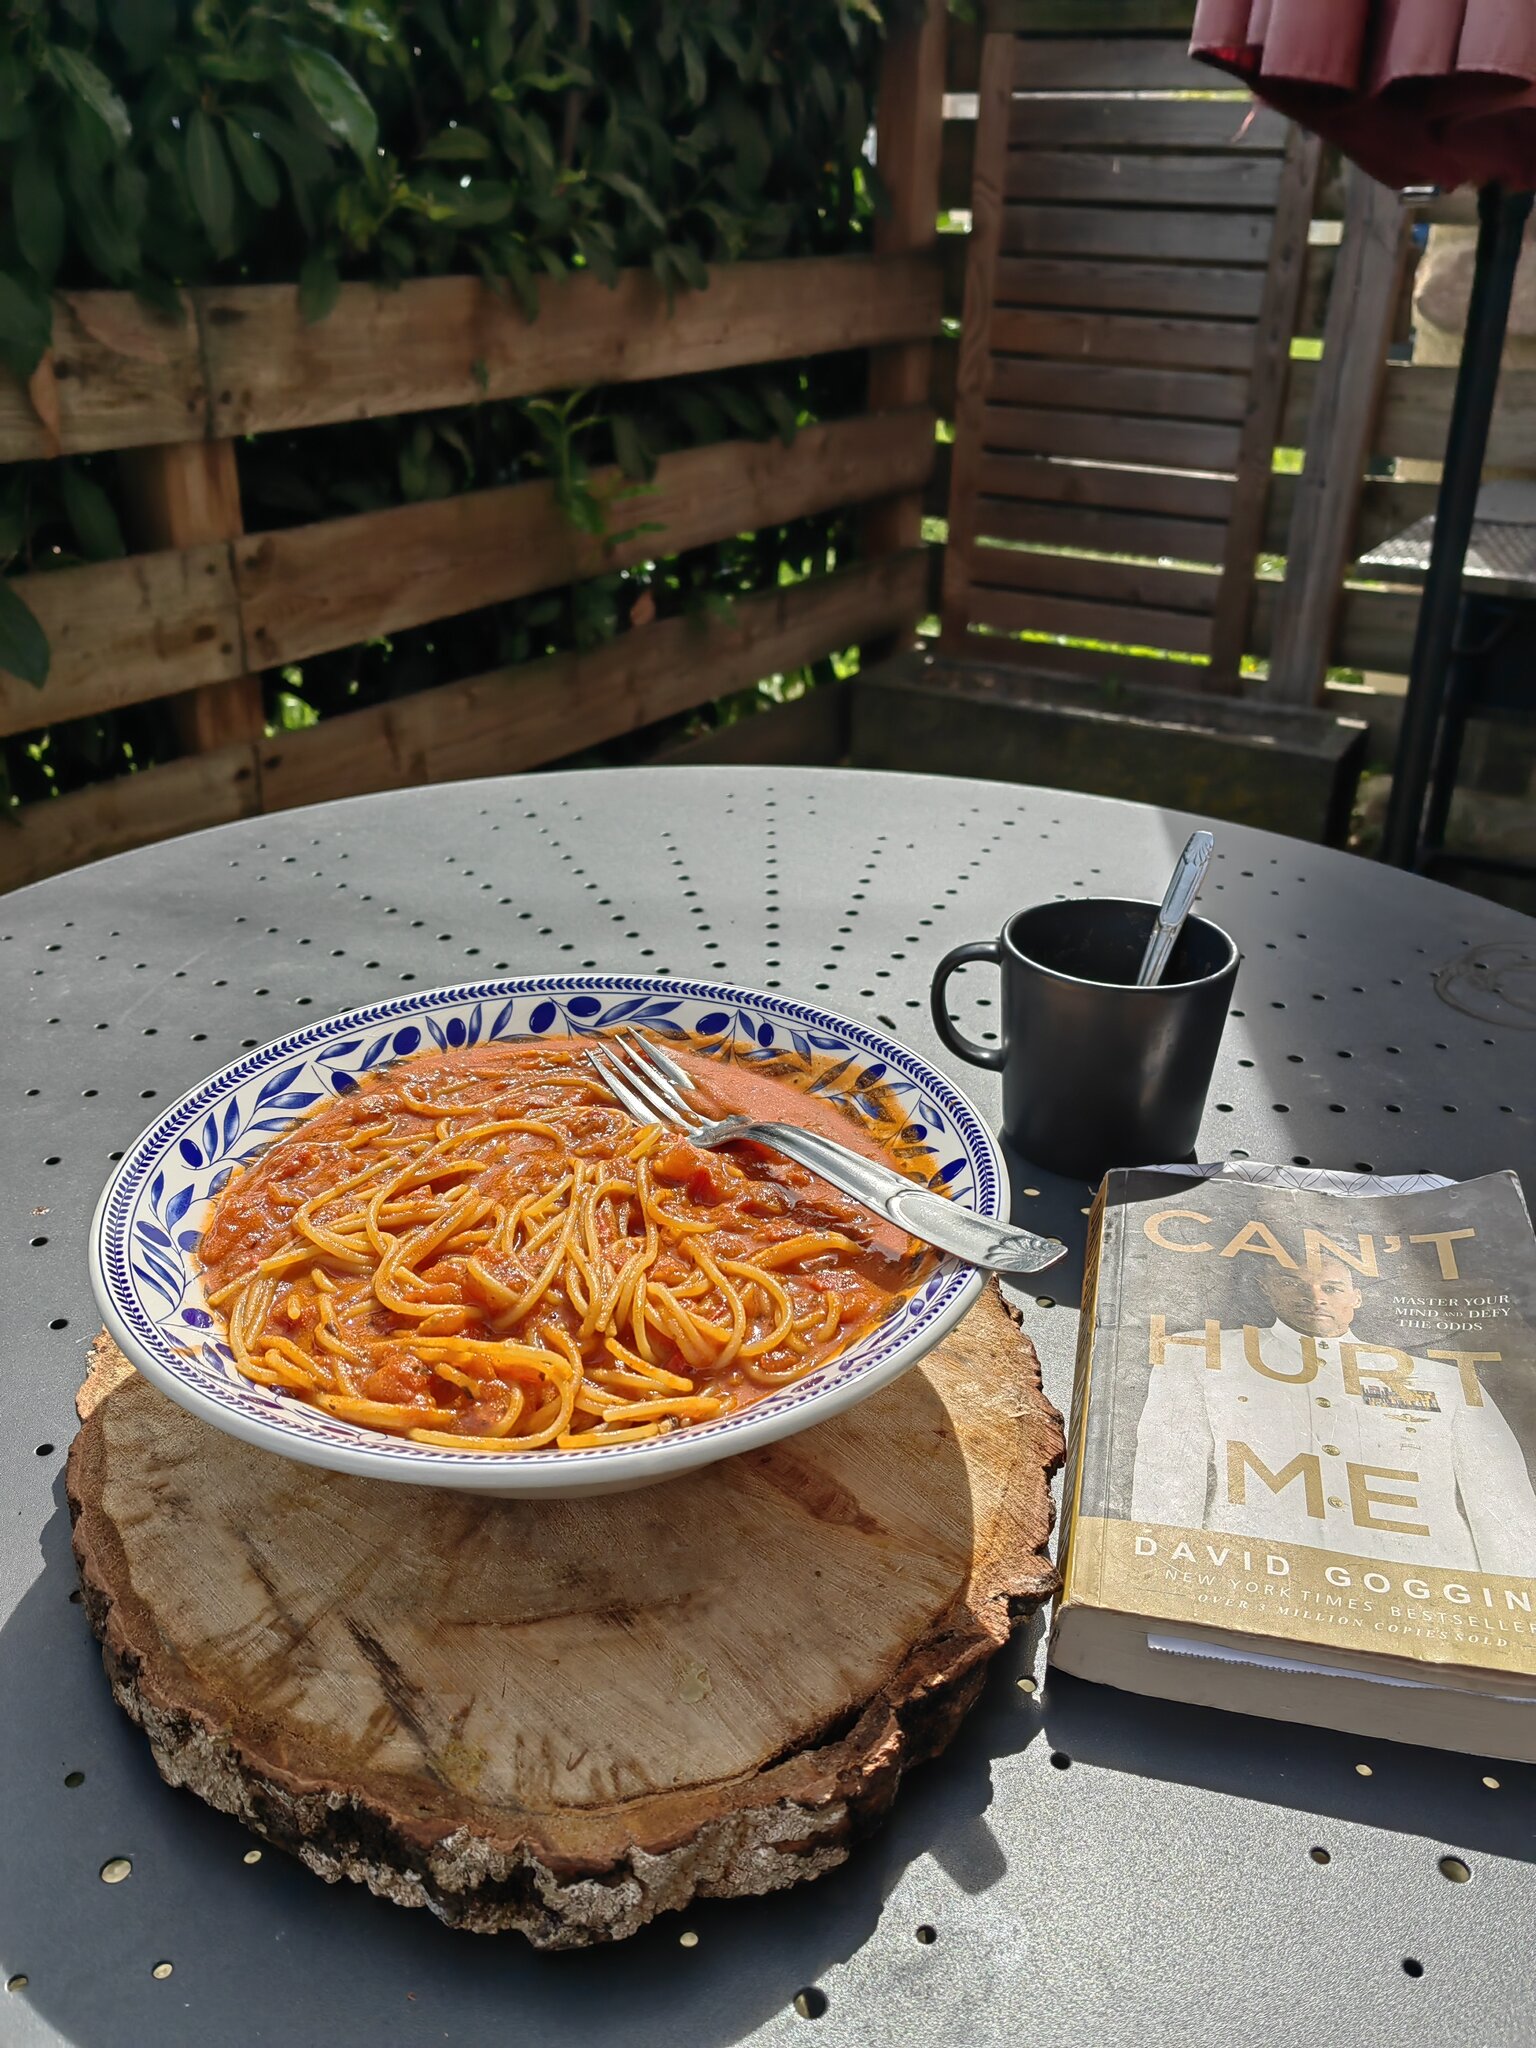 spaghetti in a bowl on a table with a mug and a book next to it